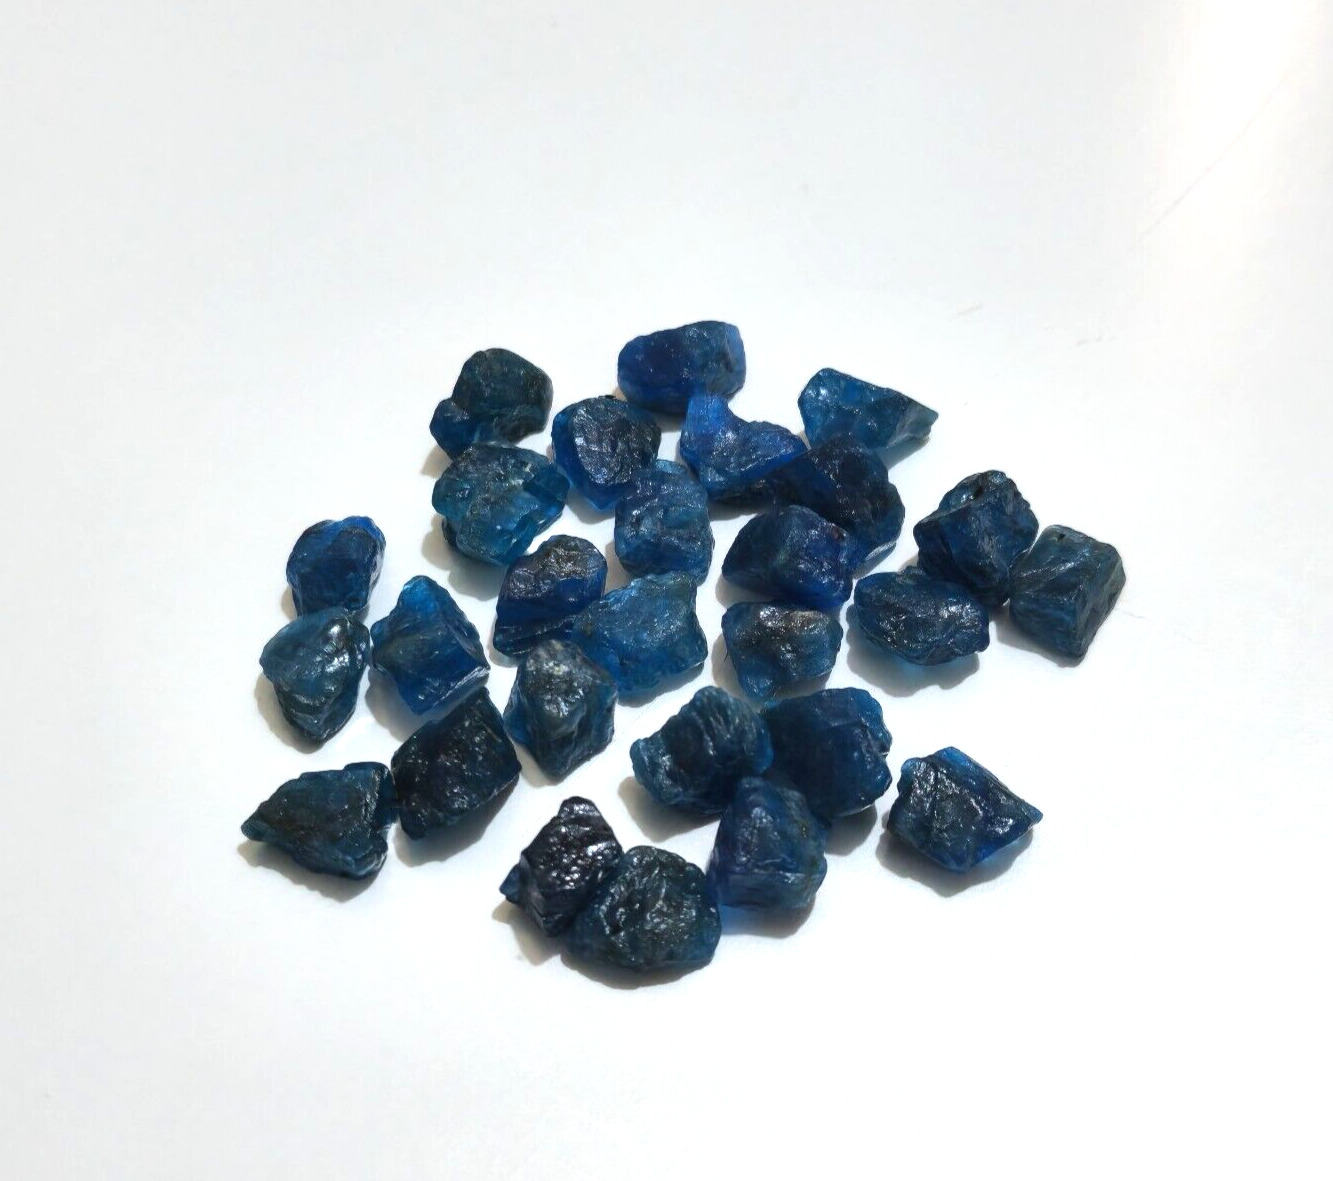 Excellent Blue Apatite Raw 27 Piece 10-14 MM Blue Apatite Crystal Rough Jewelry